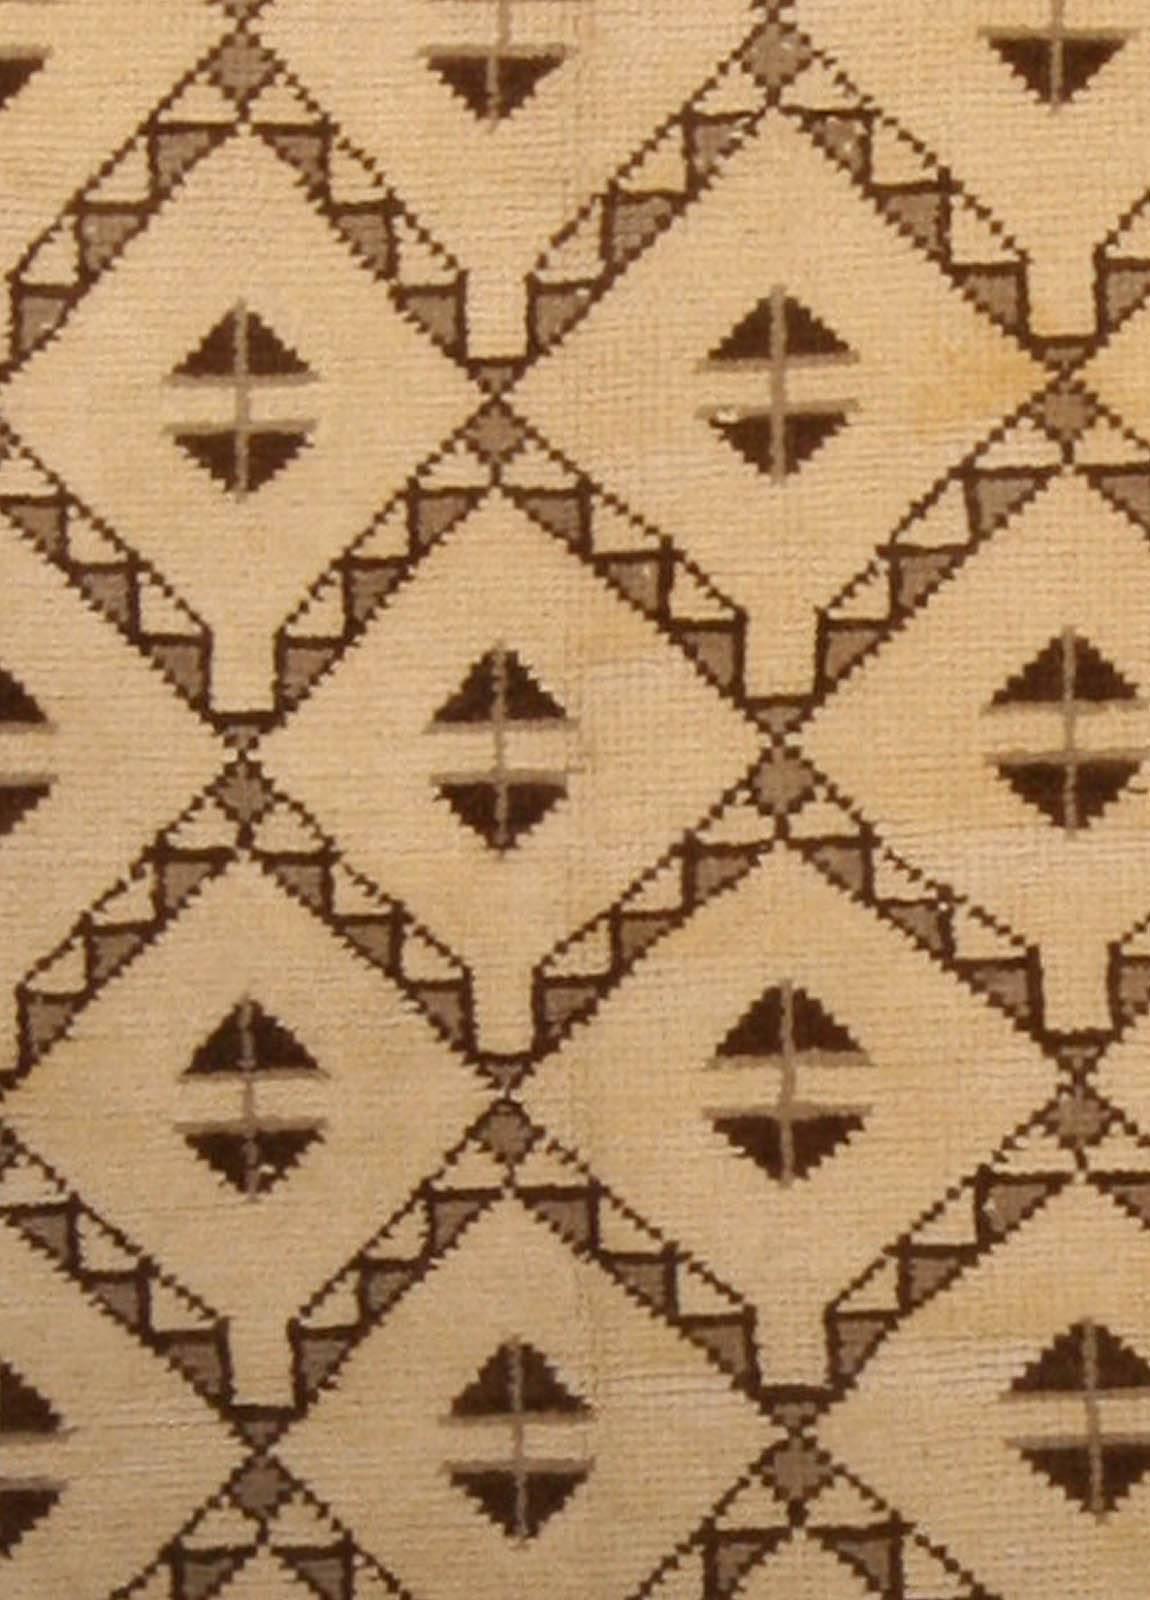 Vintage Tribal Moroccan rug with brown triangles motif on camel background
Size: 6'2